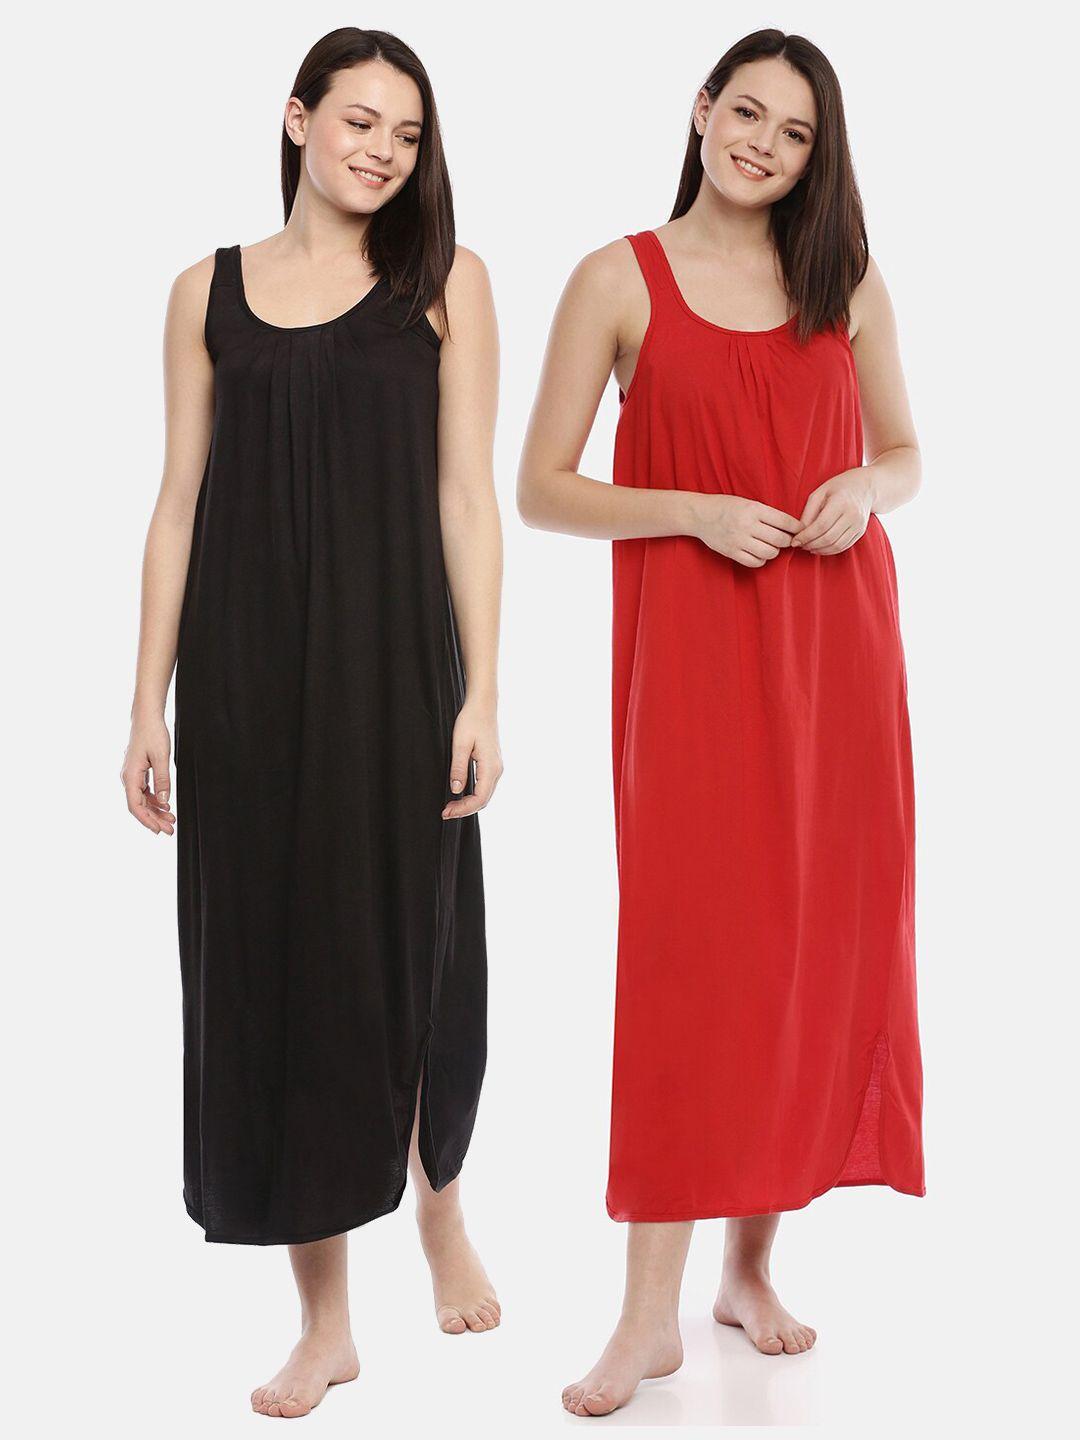 goldstroms pack of 2 black & red pure cotton nightdress